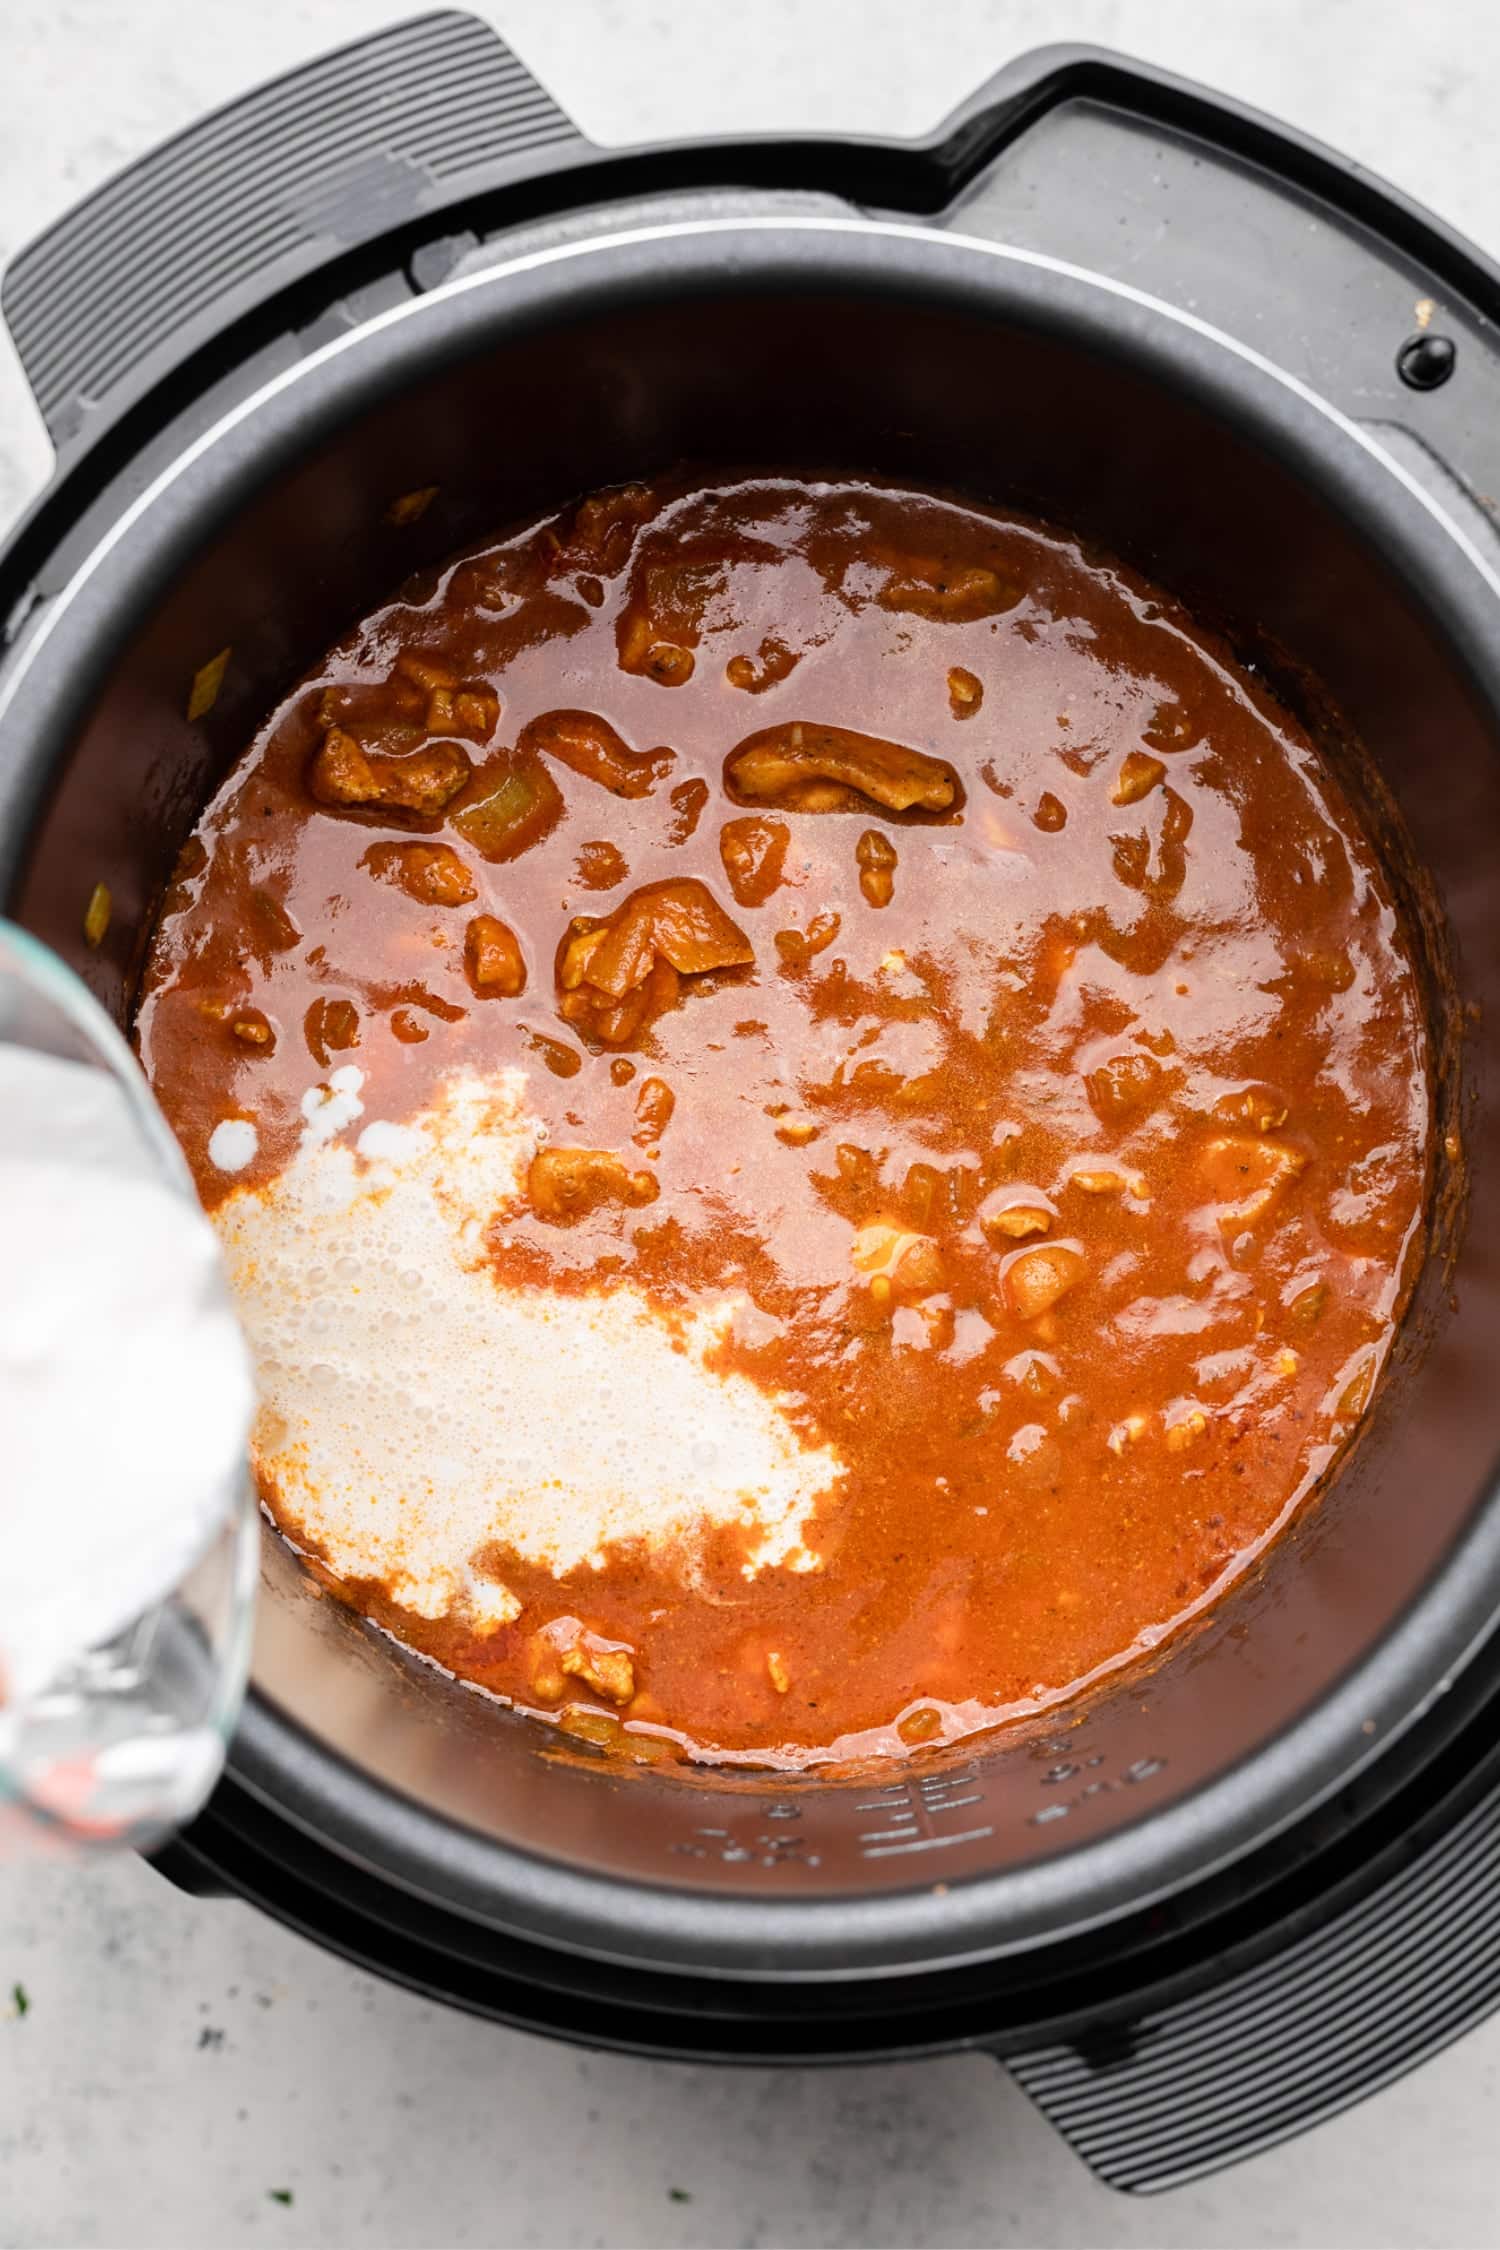 Adding the yogurt to the simmered curry dish in the instant pot.